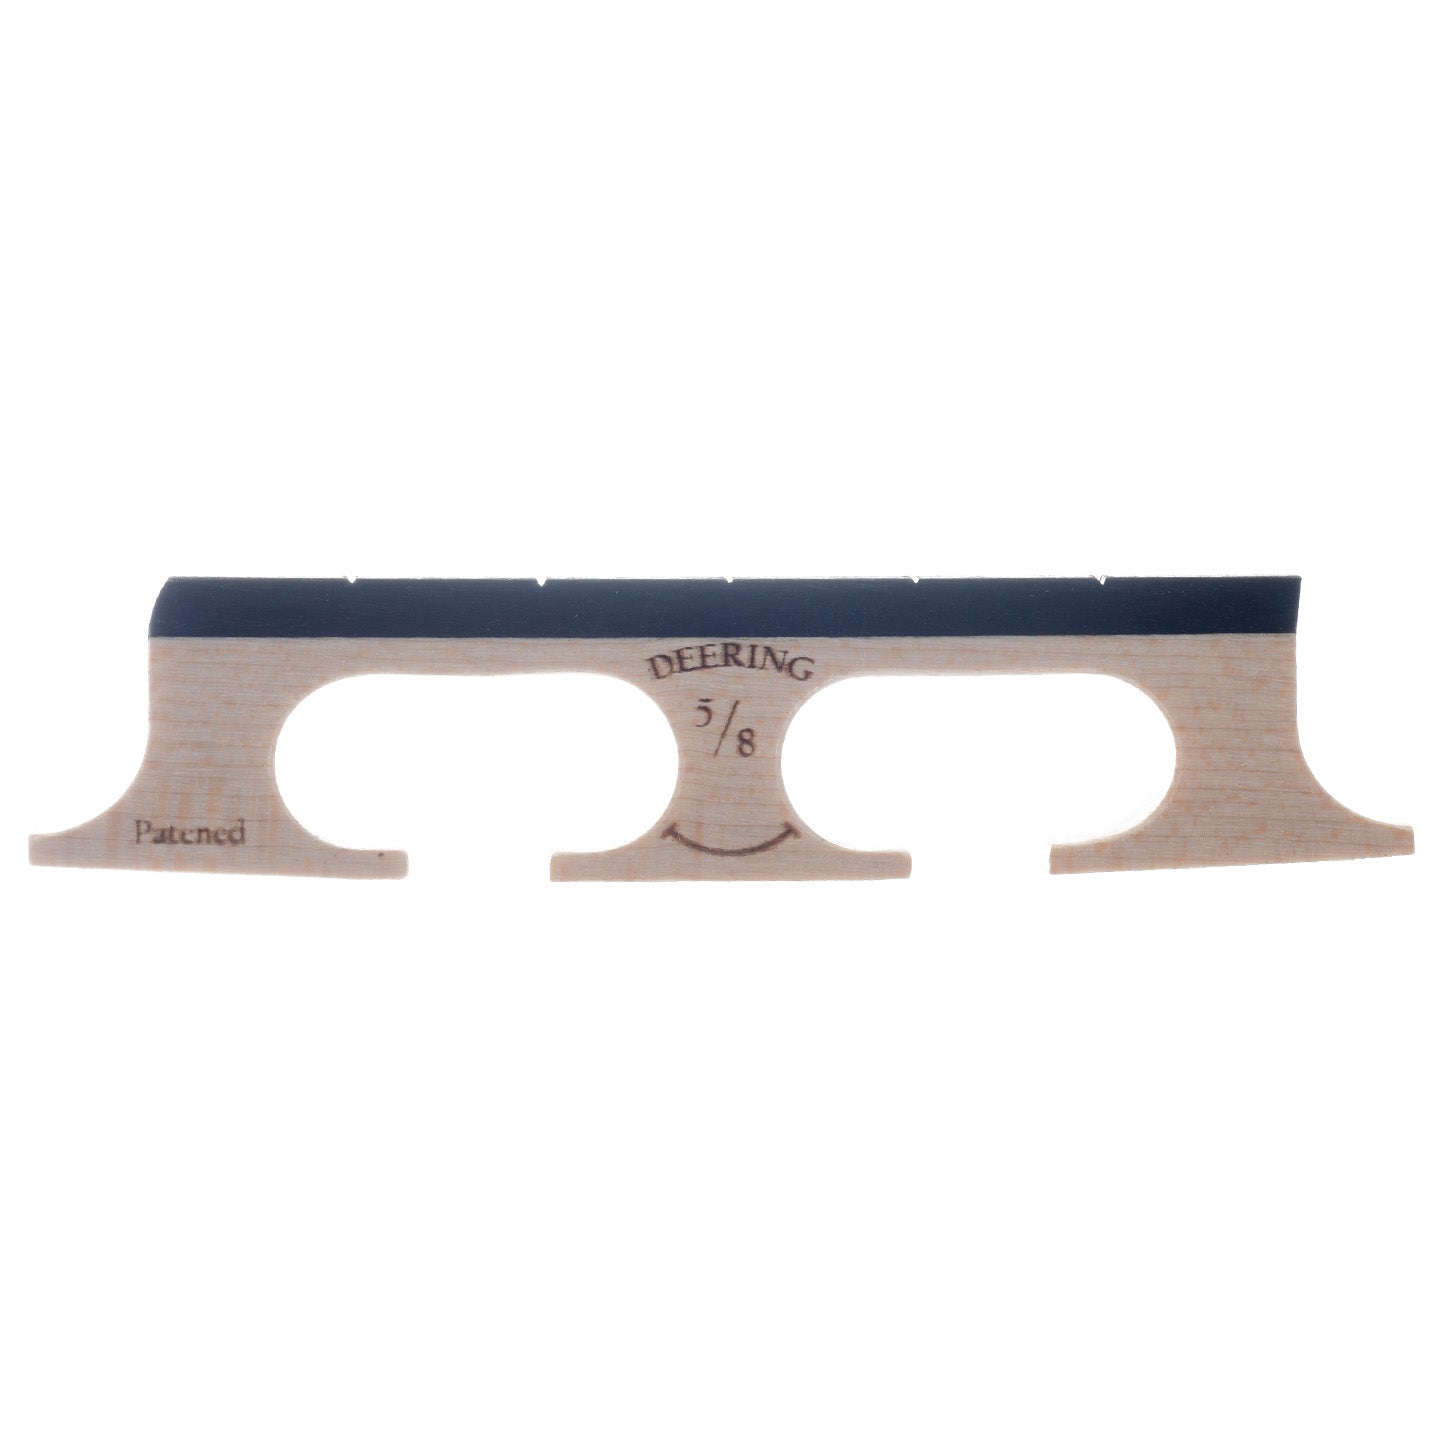 Front of Deering 5/8" Smile Banjo Bridge, with Curved Feet